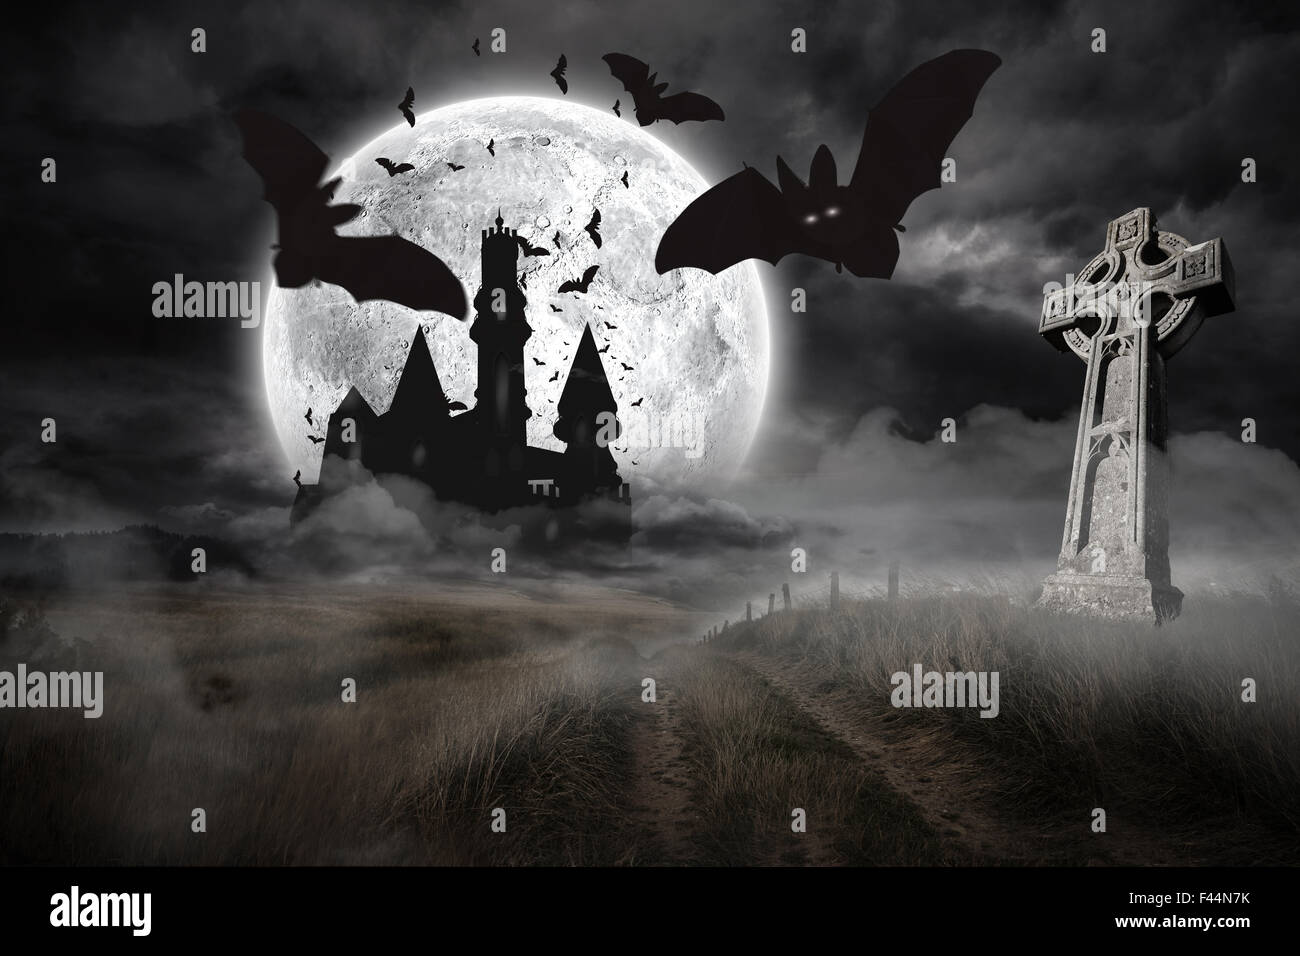 Bats flying from draculas castle Stock Photo